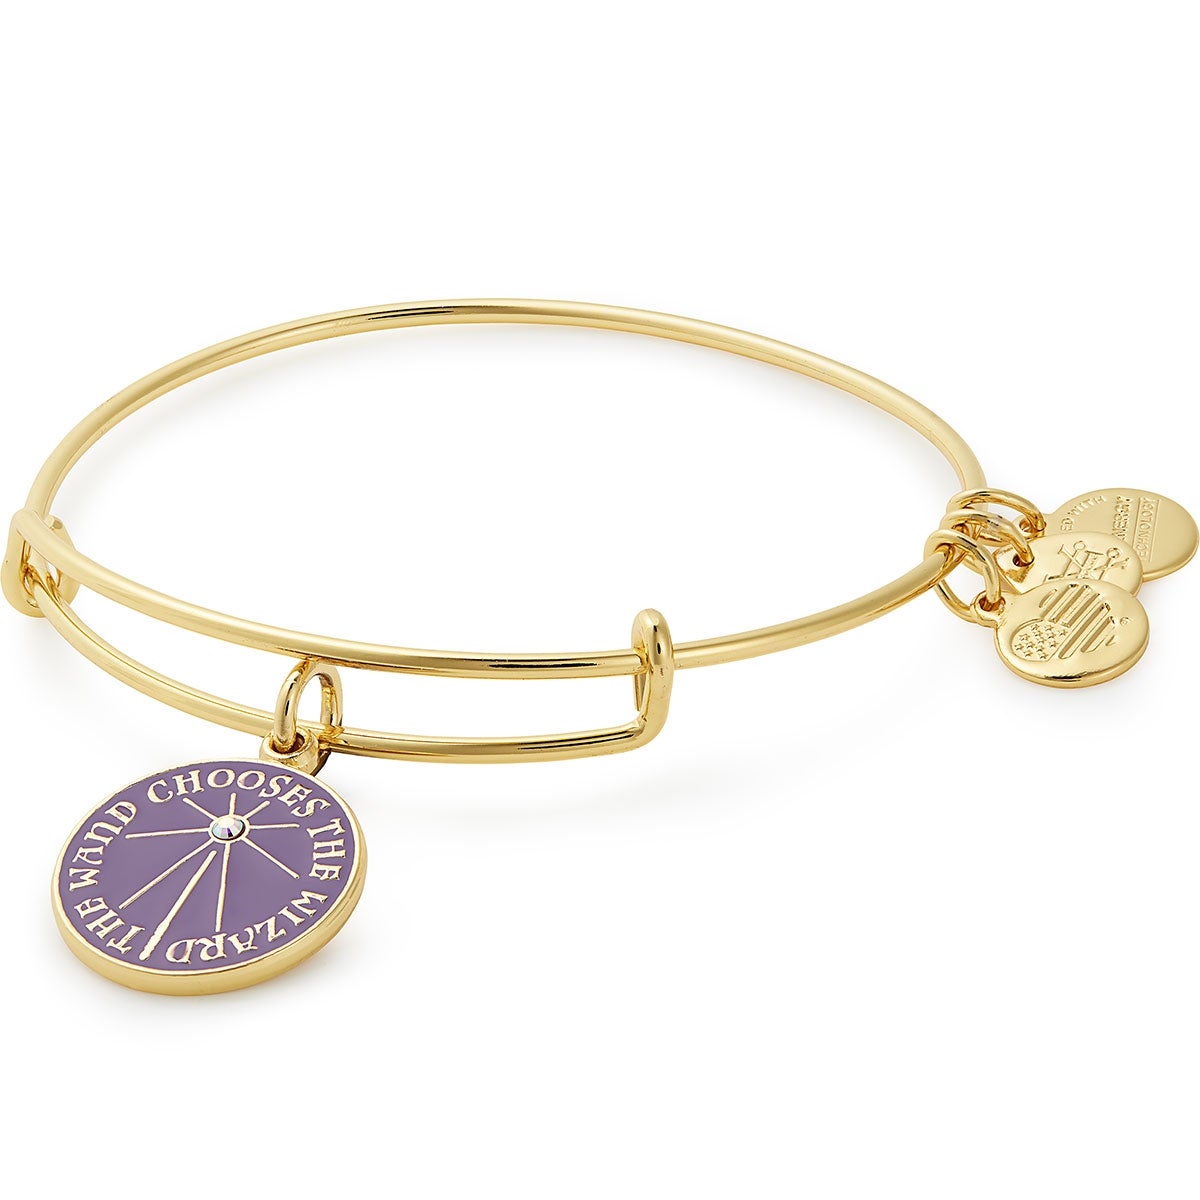 Harry Potter™ 'The Wand Chooses the Wizard' Charm Bangle